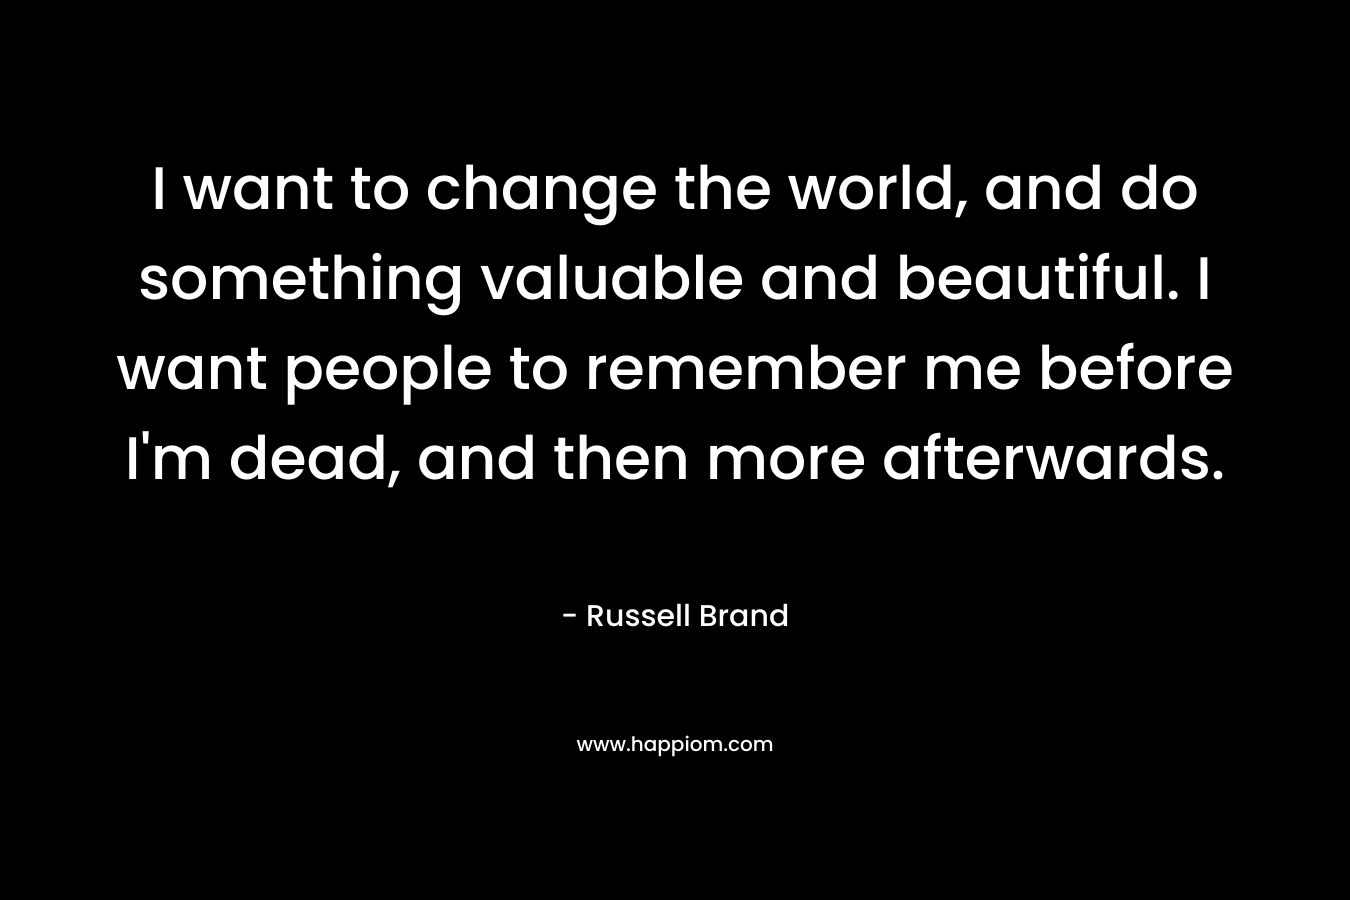 I want to change the world, and do something valuable and beautiful. I want people to remember me before I'm dead, and then more afterwards.